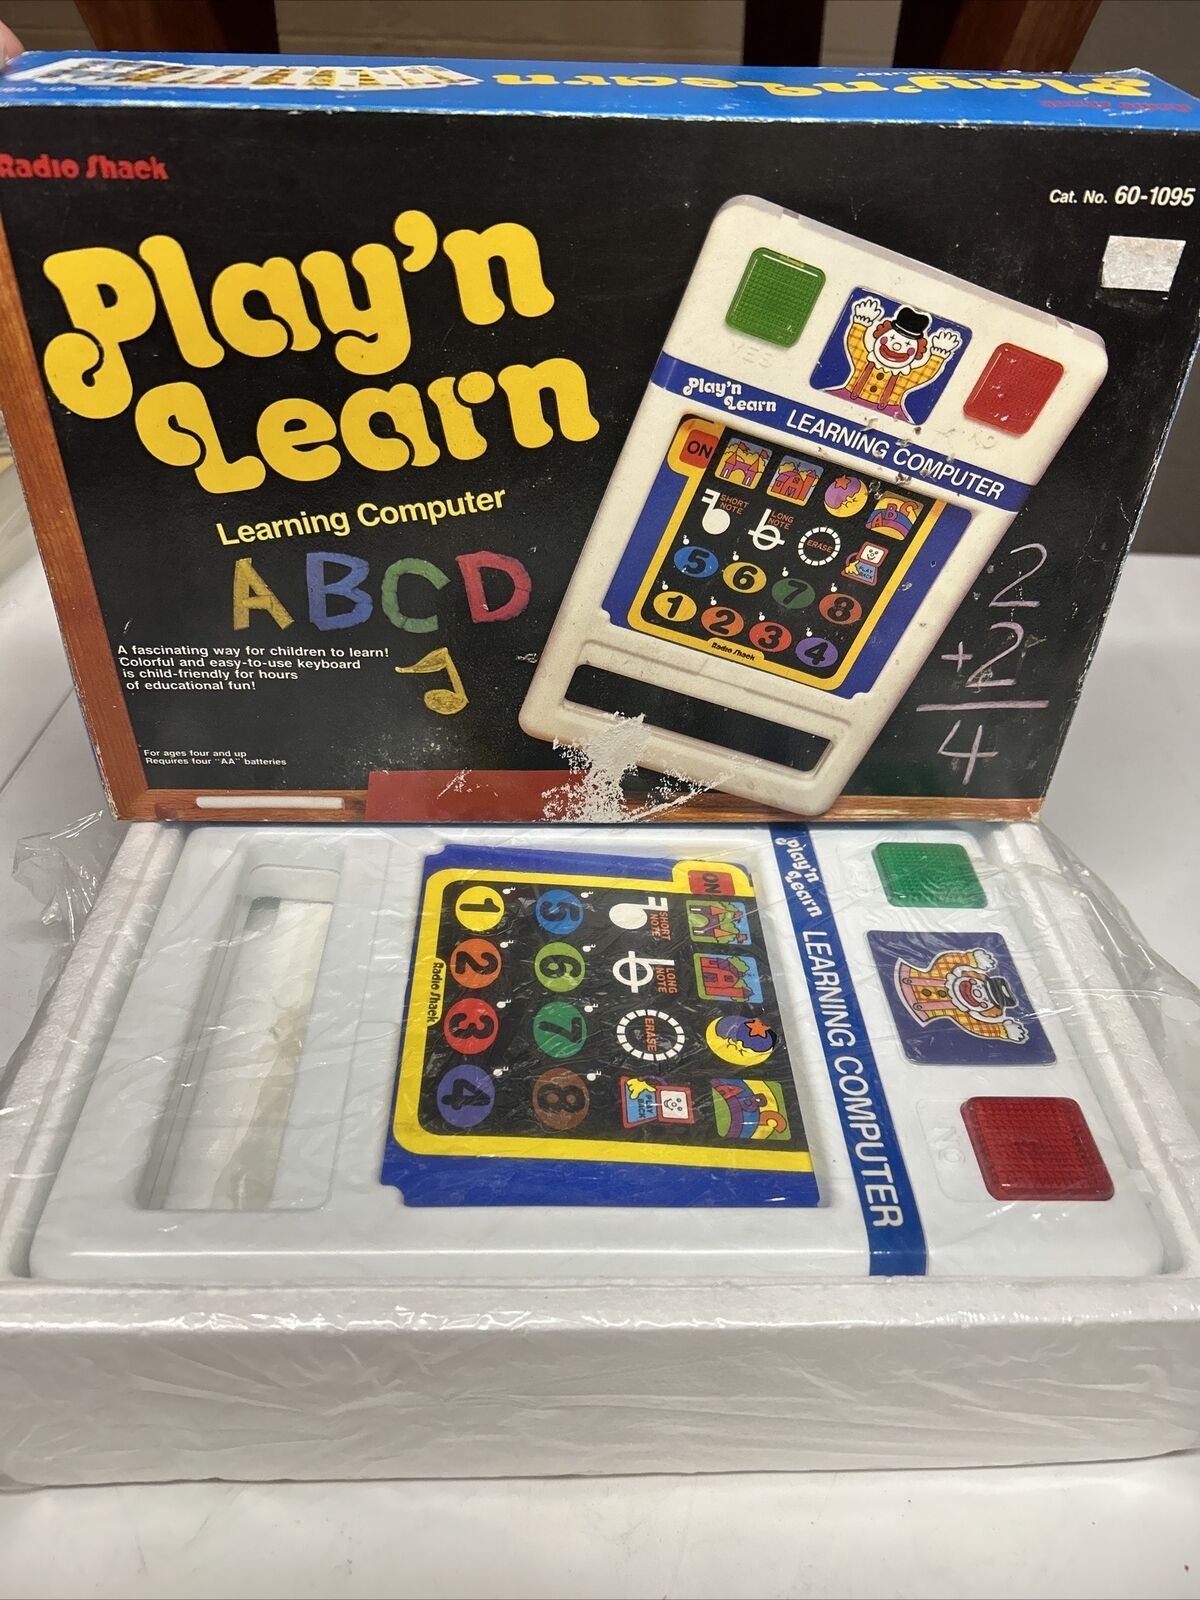 Radio Shack Play 'N Learn Learning Computer Children's Learning Toy Cat# 60-1095